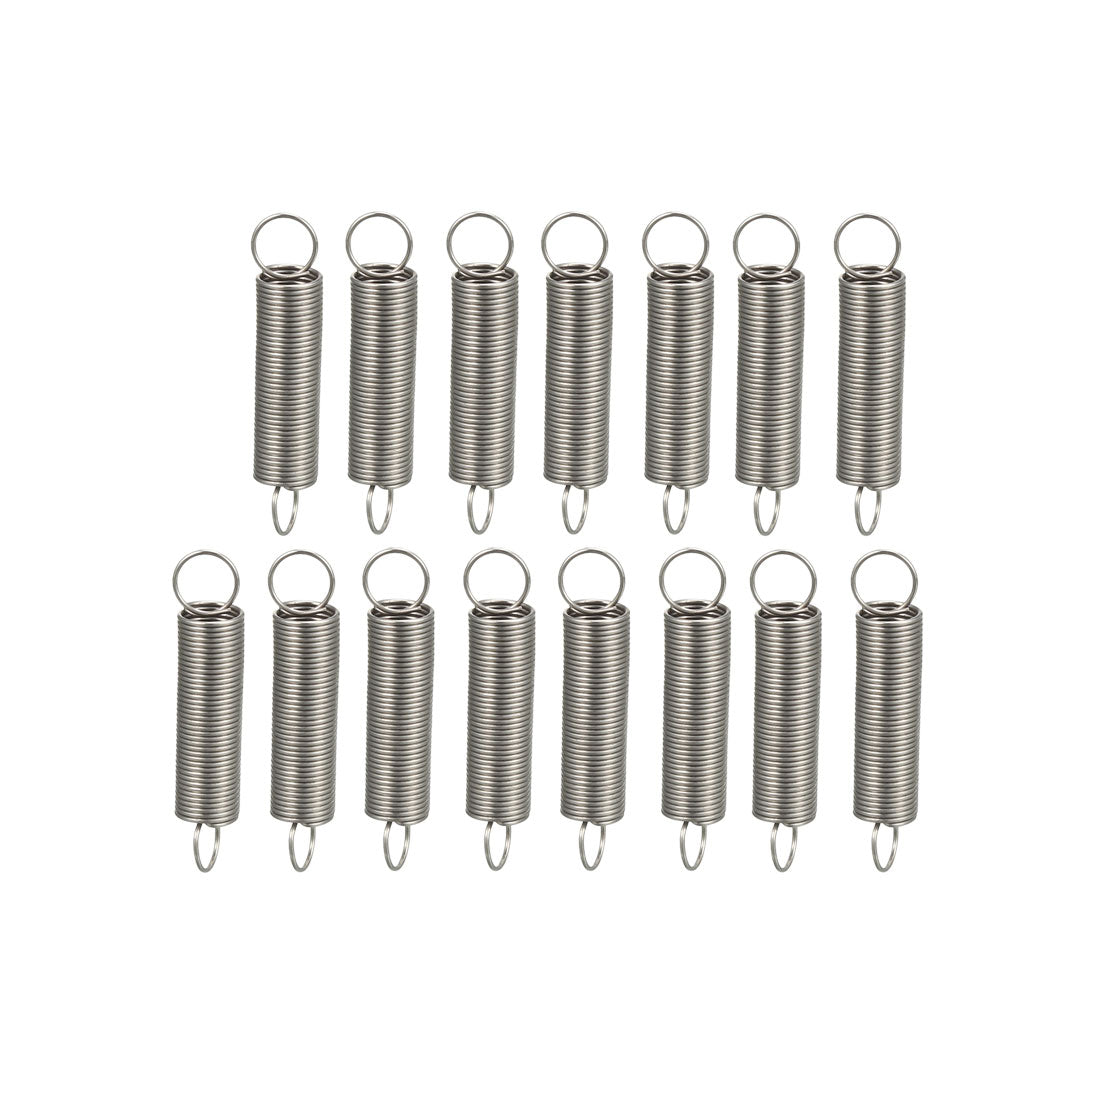 uxcell Uxcell Extended Tension Spring Wire Diameter 0.016", OD 0.2", Free Length 0.98" 15pcs